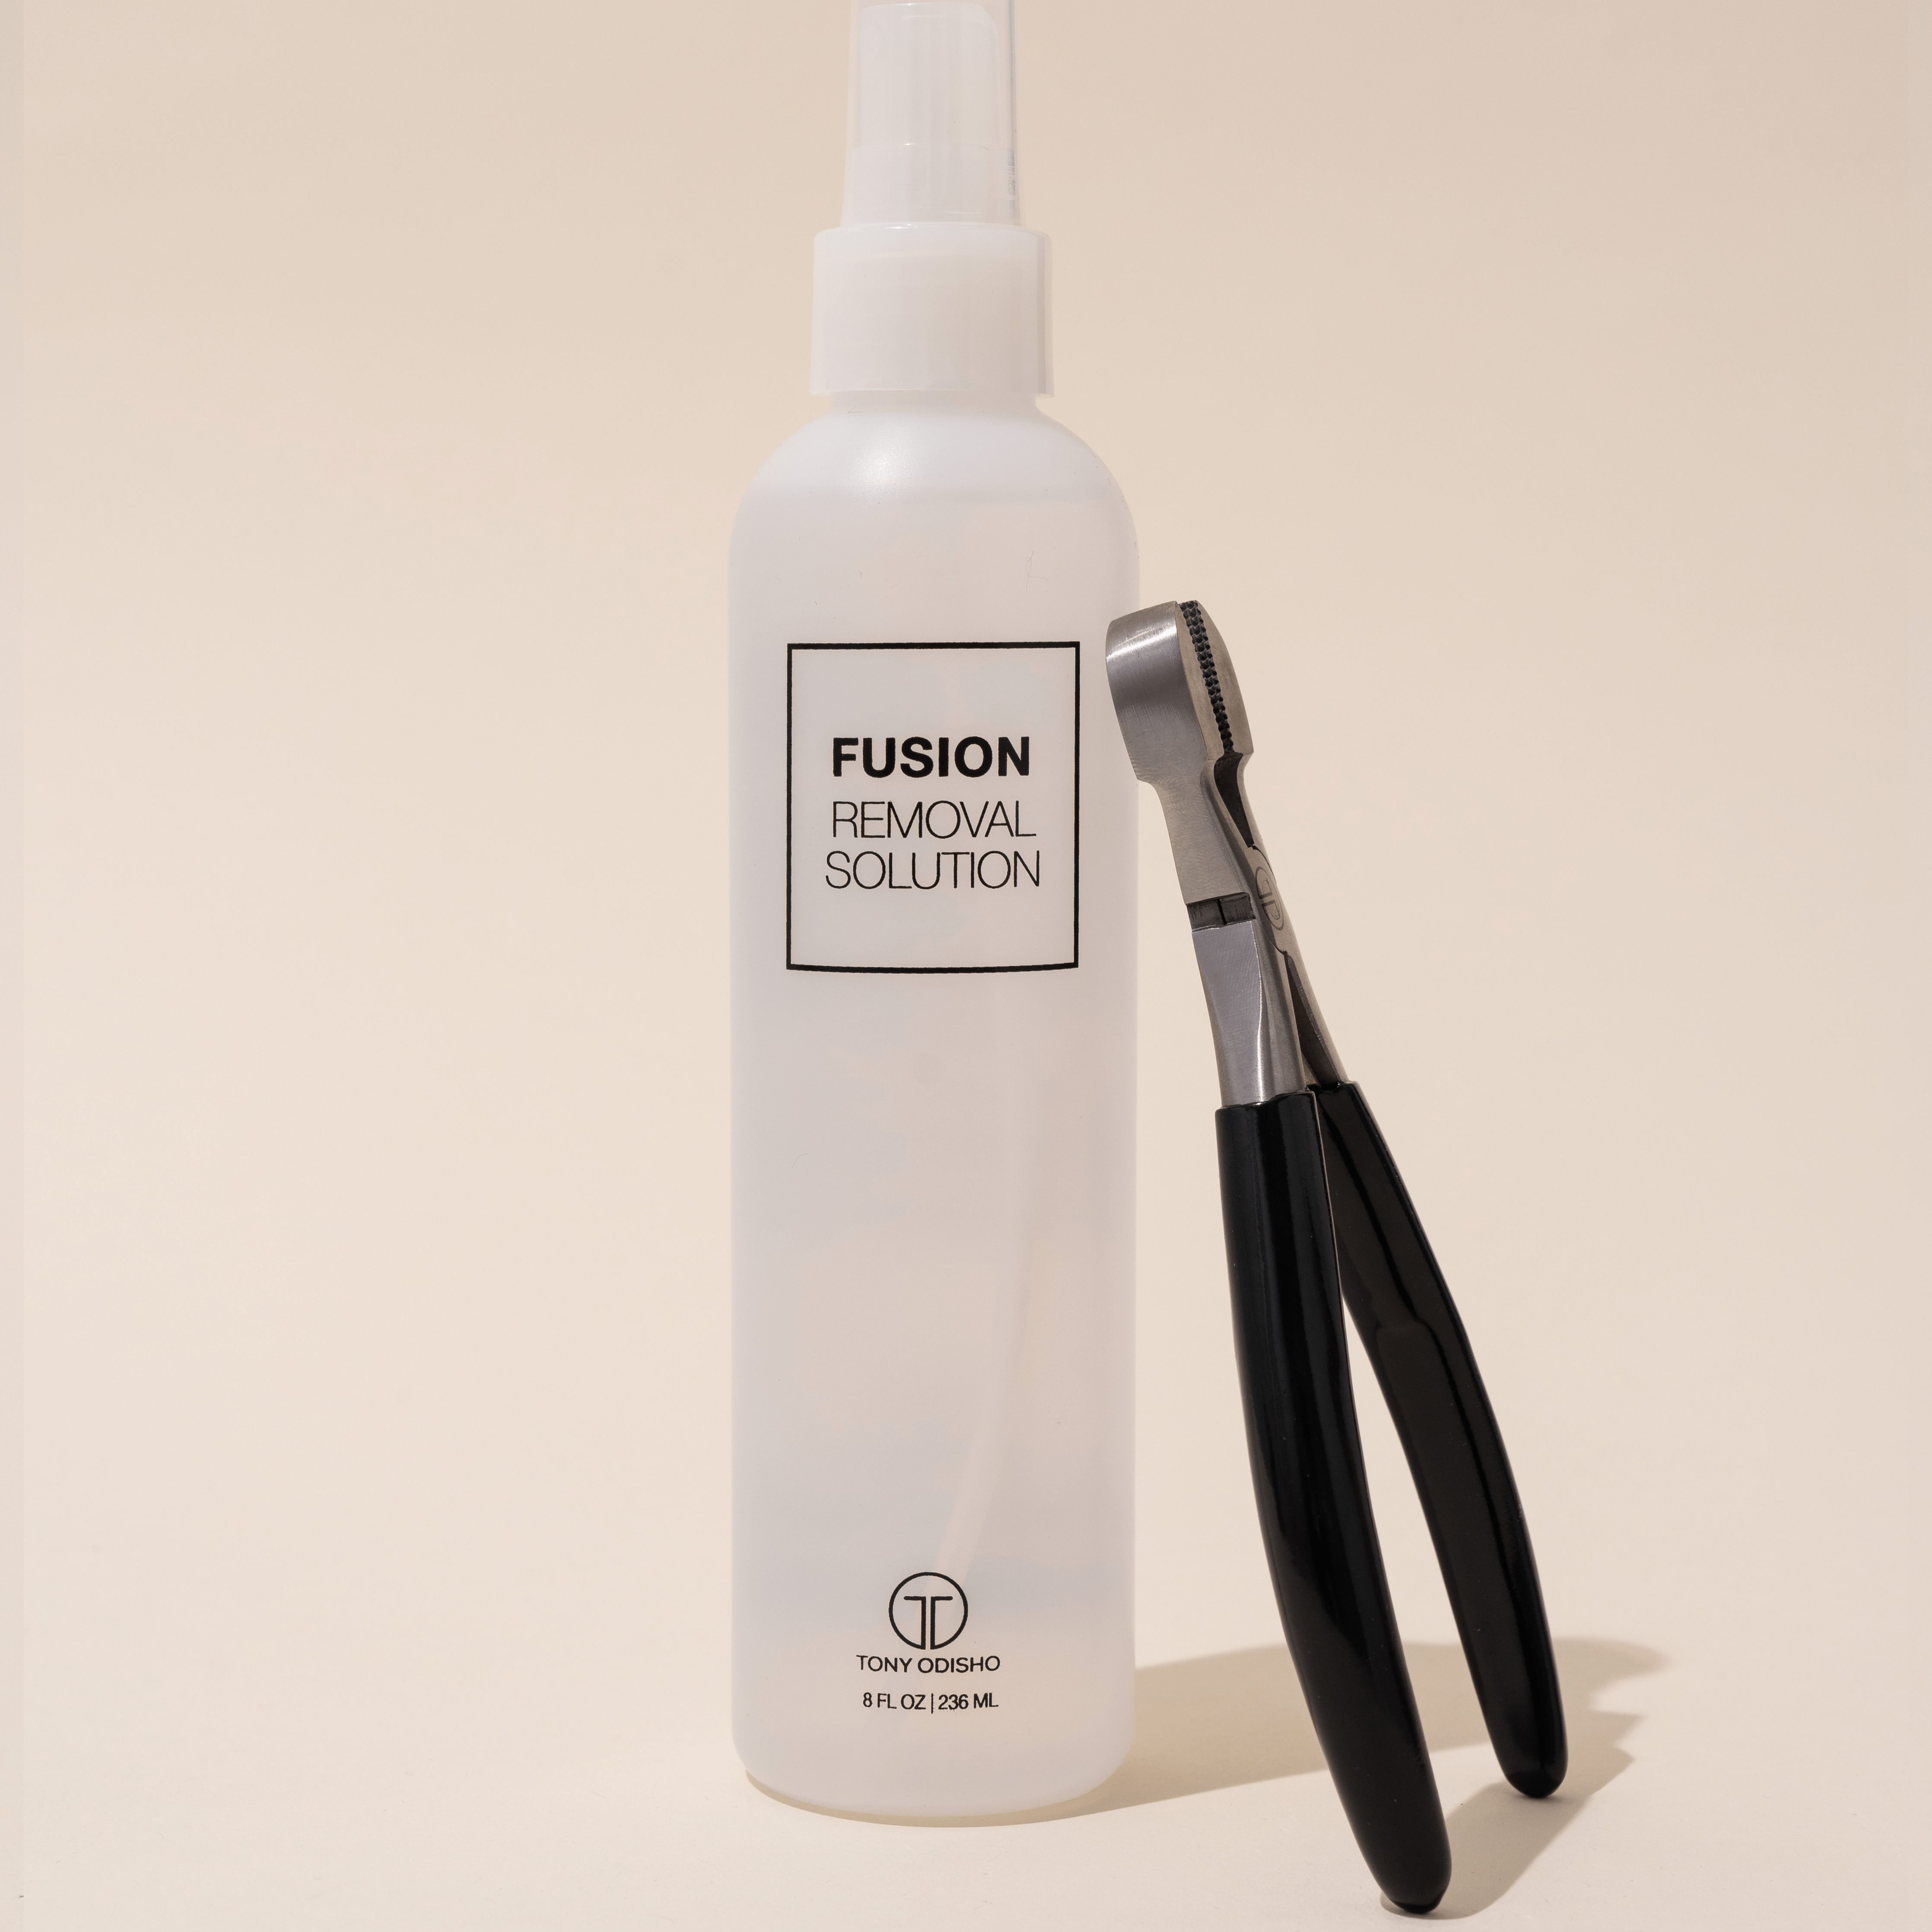 Fusion Hair Extensions Removal Solution 8oz - Image 1